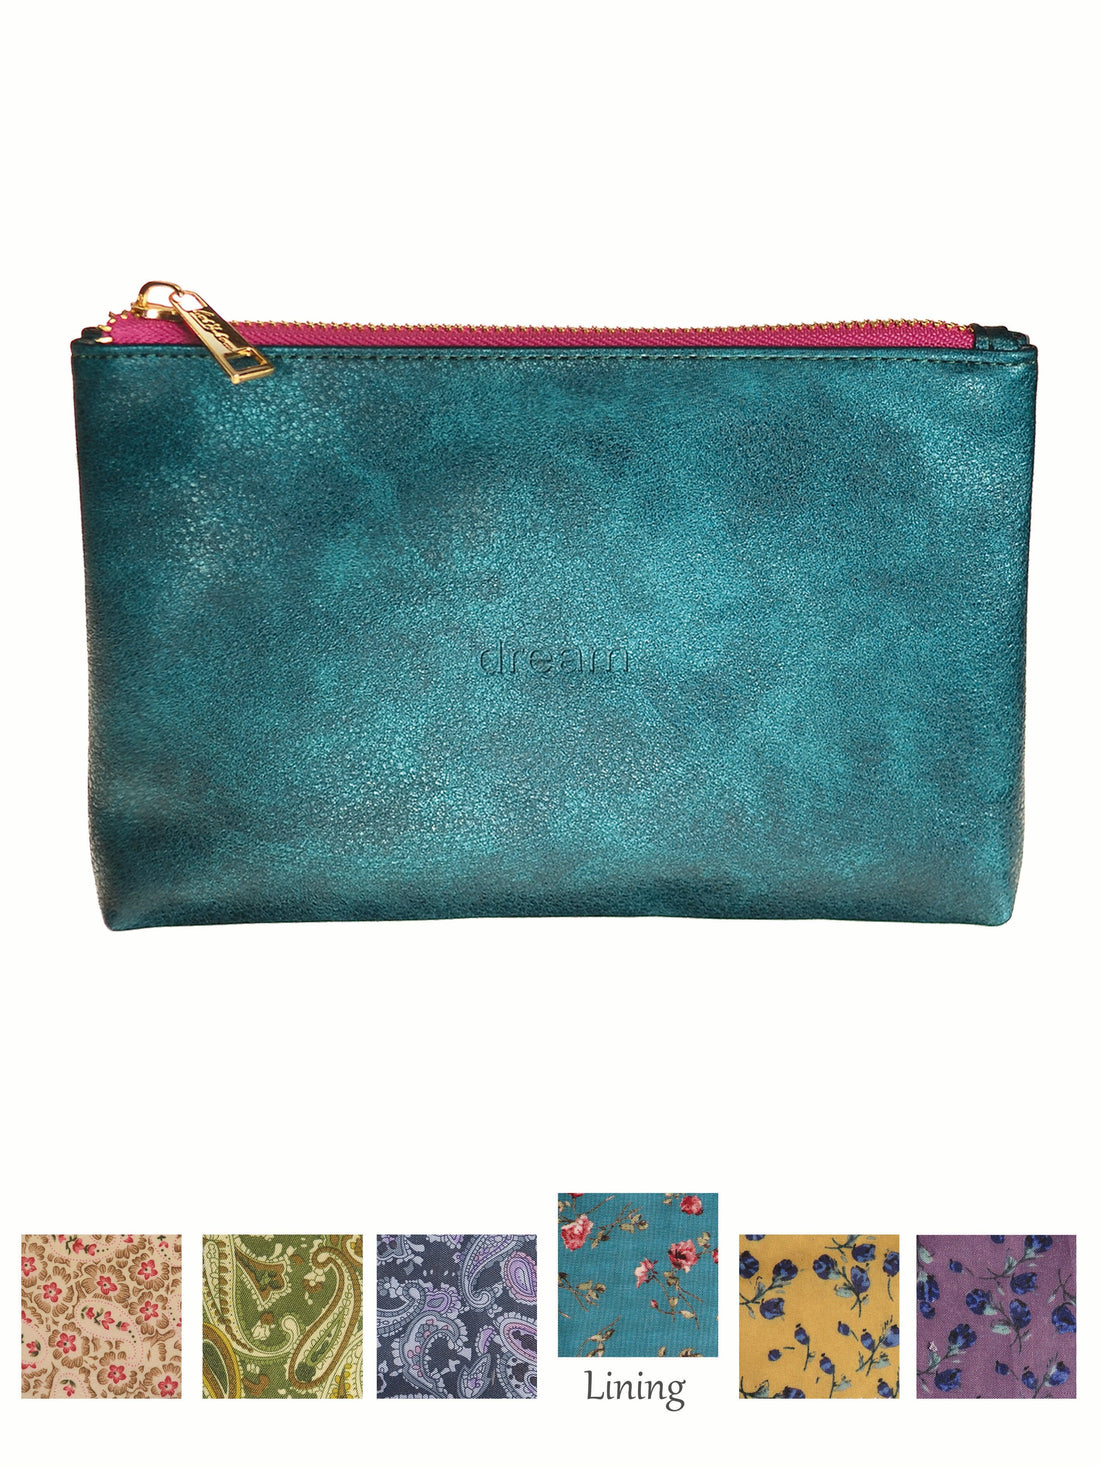 DREAM Make Up Pouch in Teal & Rose - WN479 Bags & Purses Hot Tomato